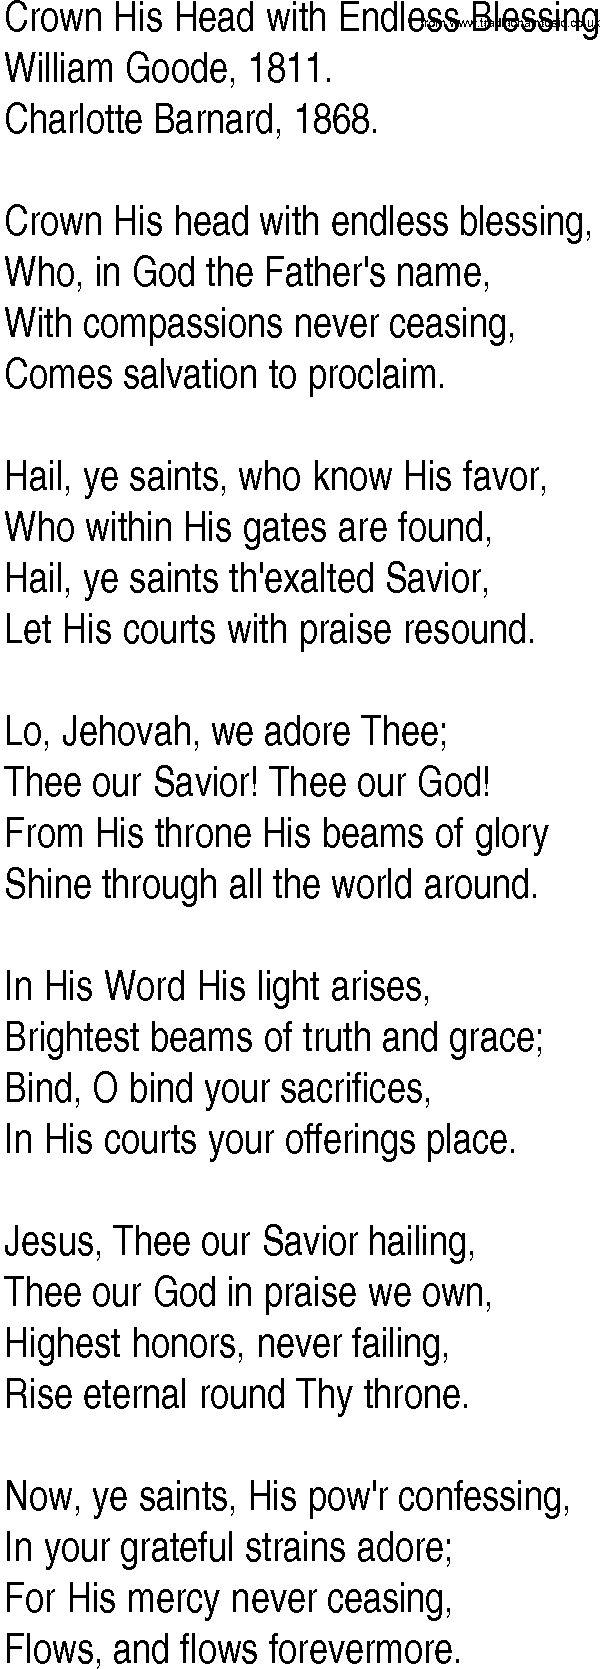 Hymn and Gospel Song: Crown His Head with Endless Blessing by William Goode lyrics